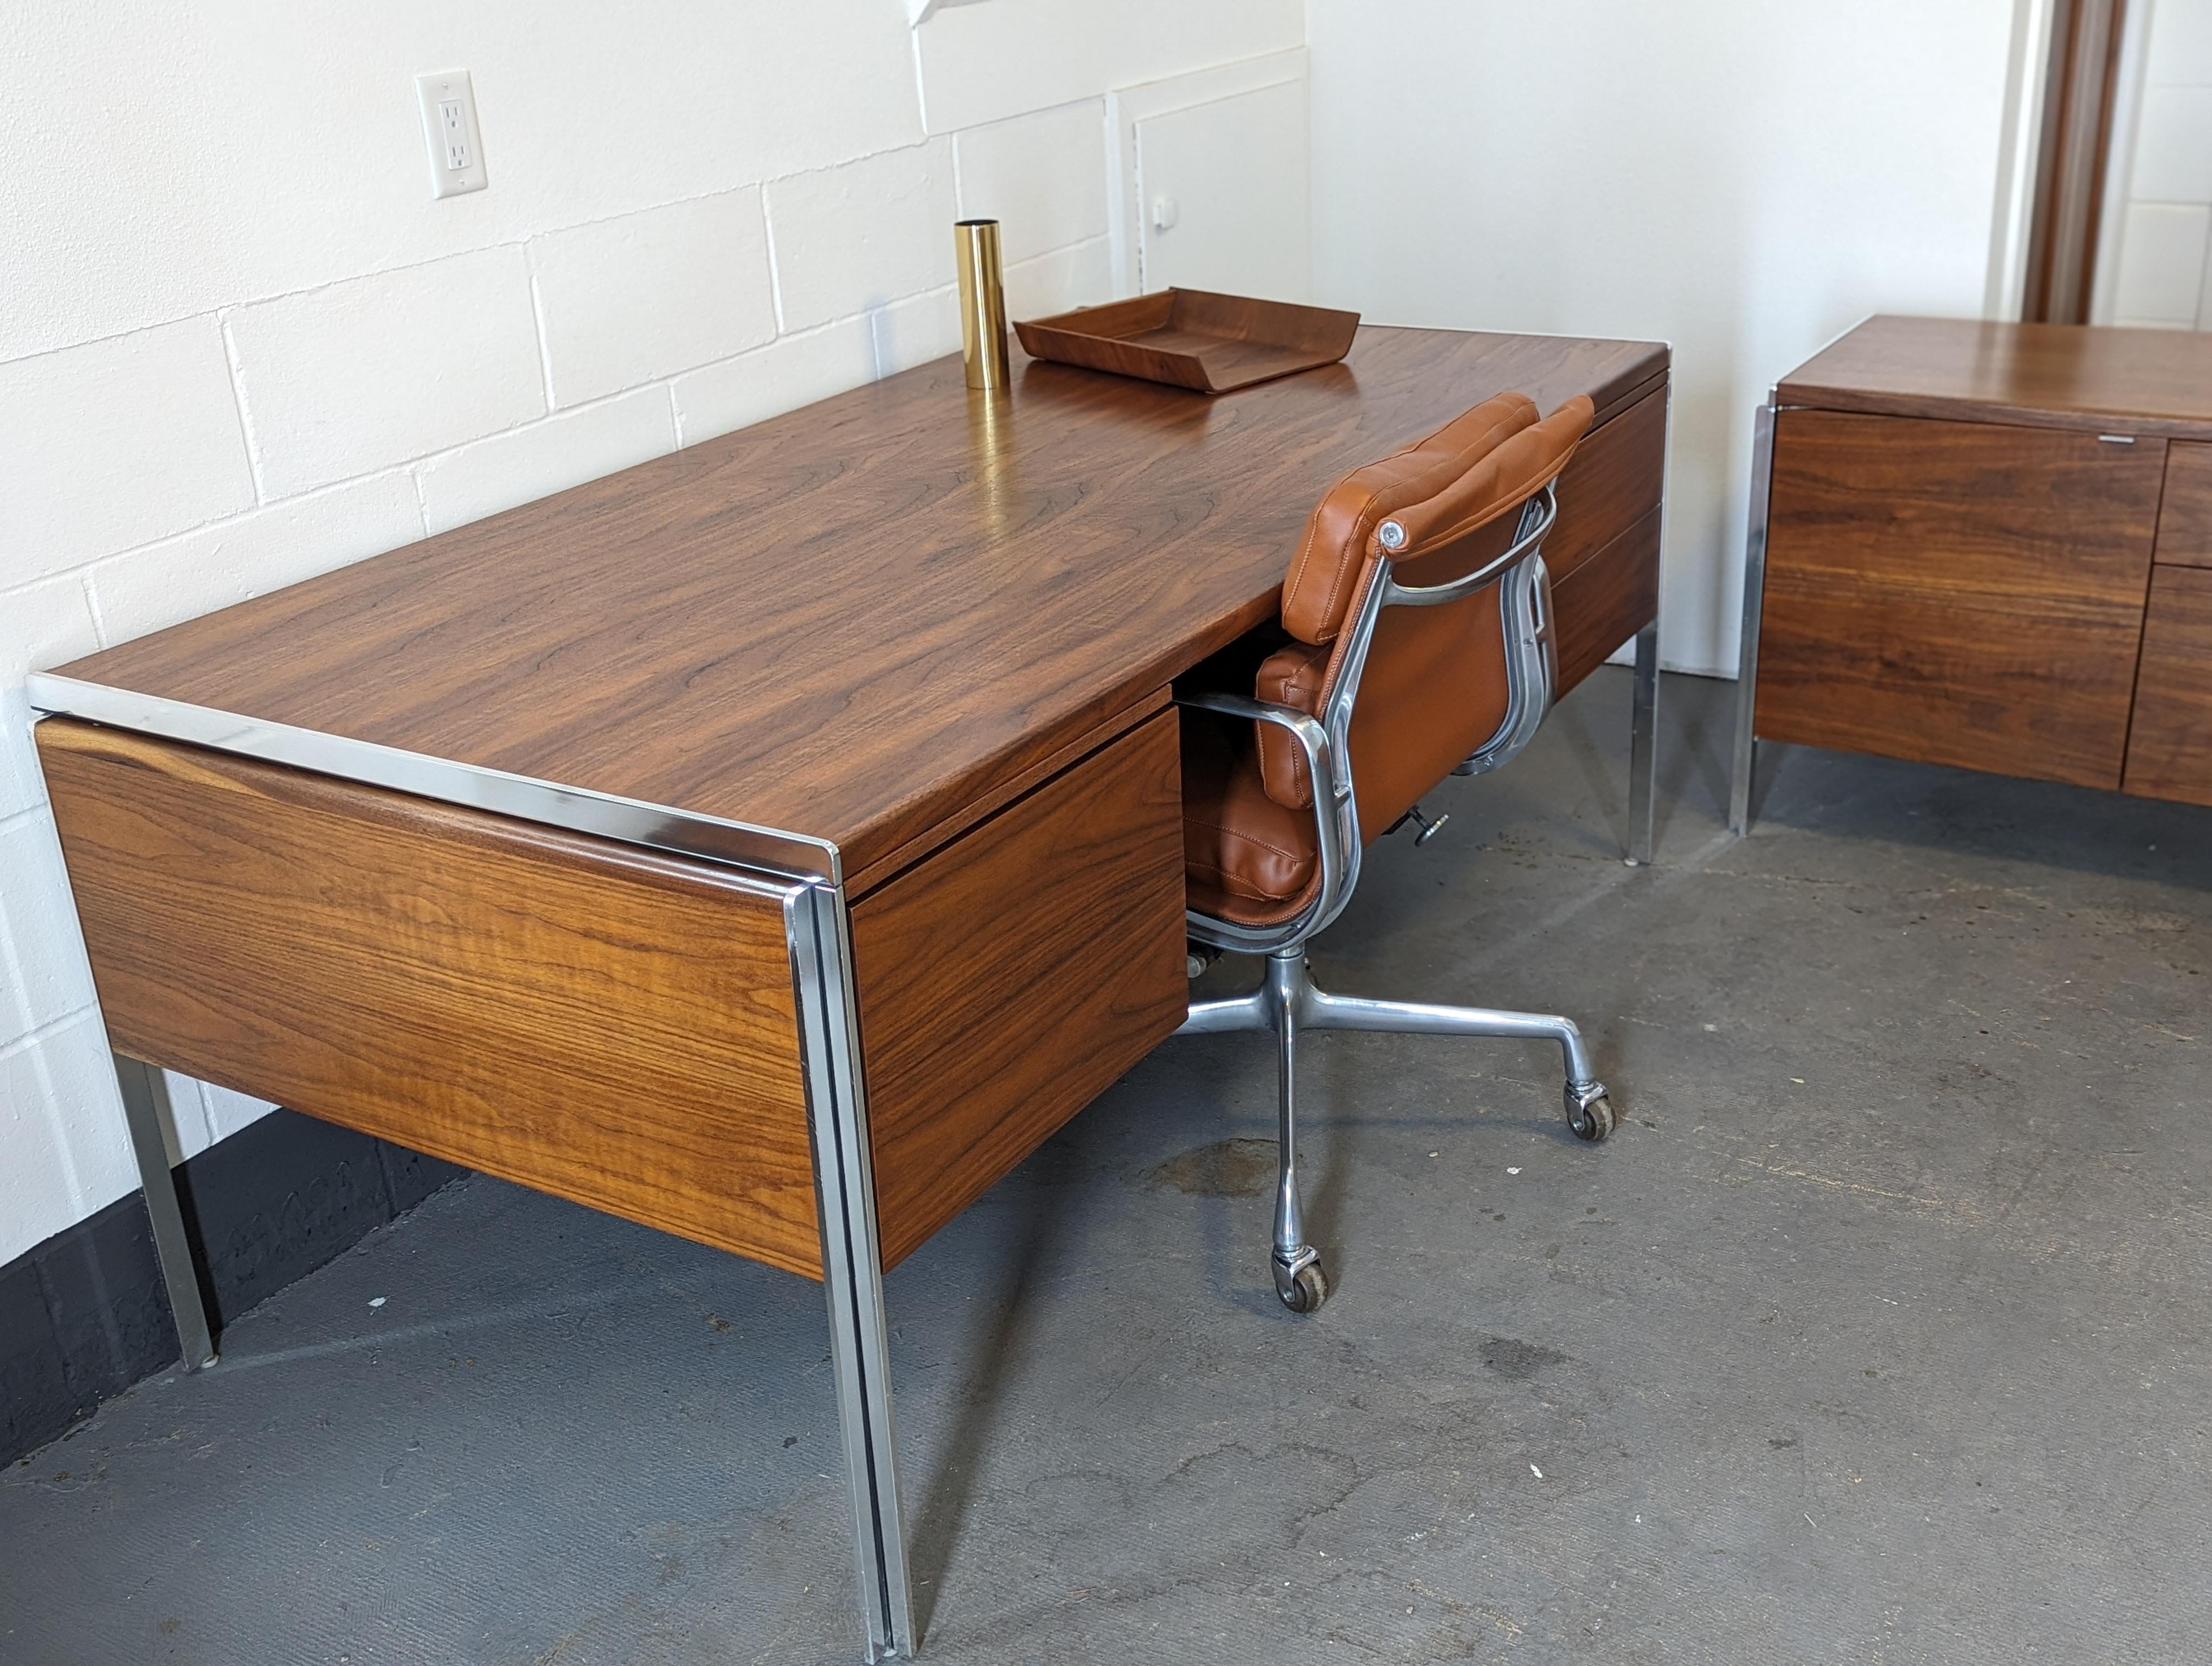 Matching executive office suite designed by Alexis Yermakov for Stow Davis in 1968 as part of the Electa line.

Stunning walnut color and figure present on this expansive executive desk designed by Alexis Yermakov for Stow Davis' 